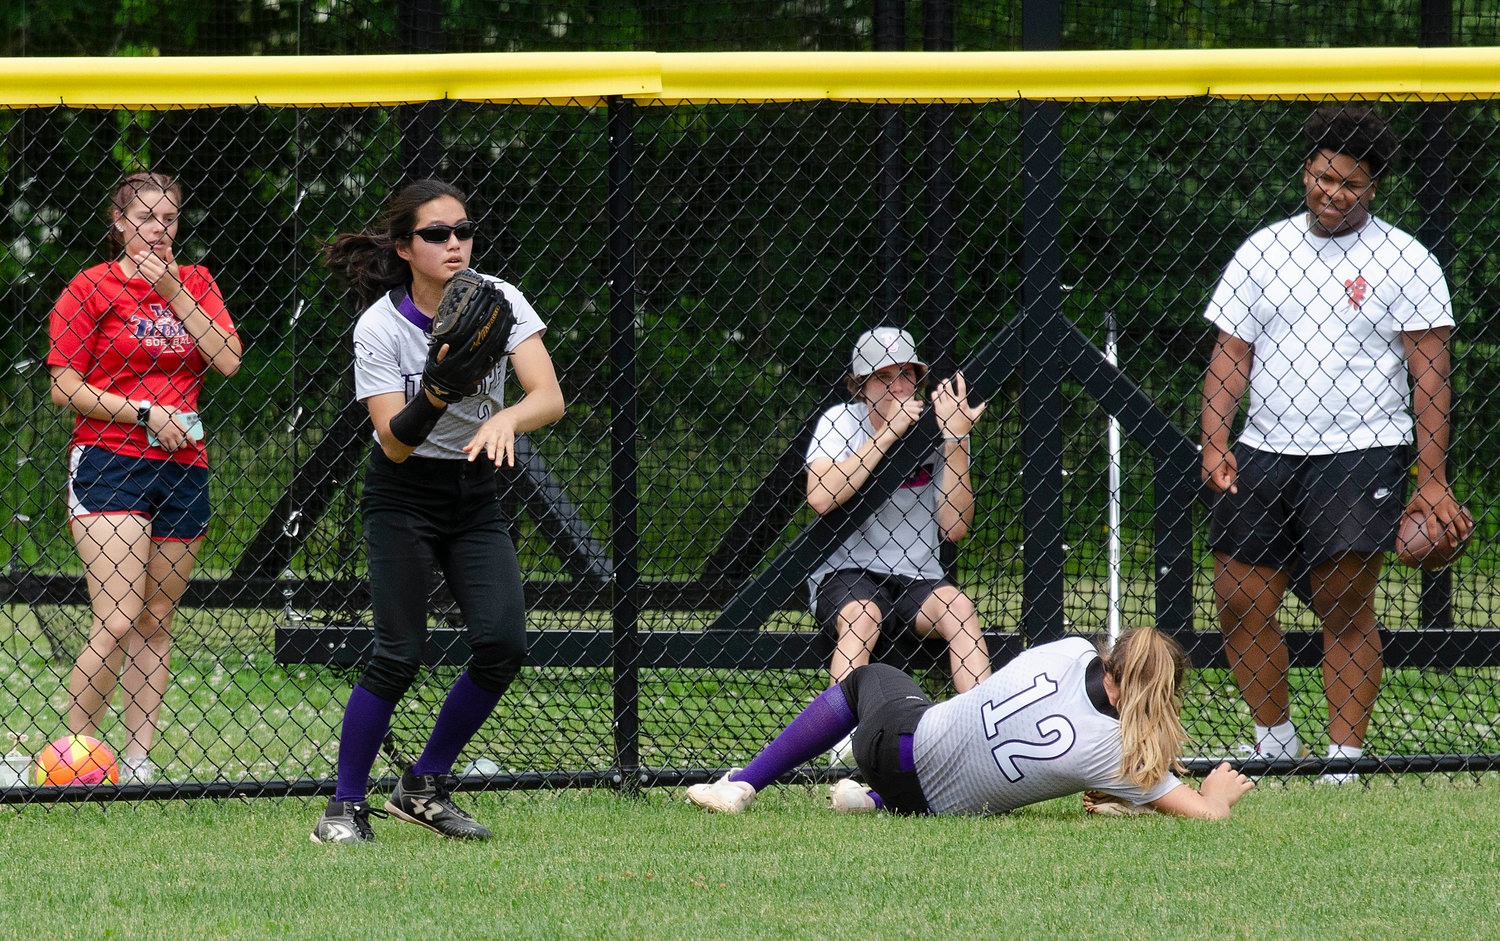 Centerfielder Jayda Sylvia attempts to make a catch of a fly ball hit to the gap in the fifth inning. She slammed into the fence and teammate Elsa White collected the ball and threw it in to prfevent further damage. Sylvia got up, brushed her self off and kept on playing.